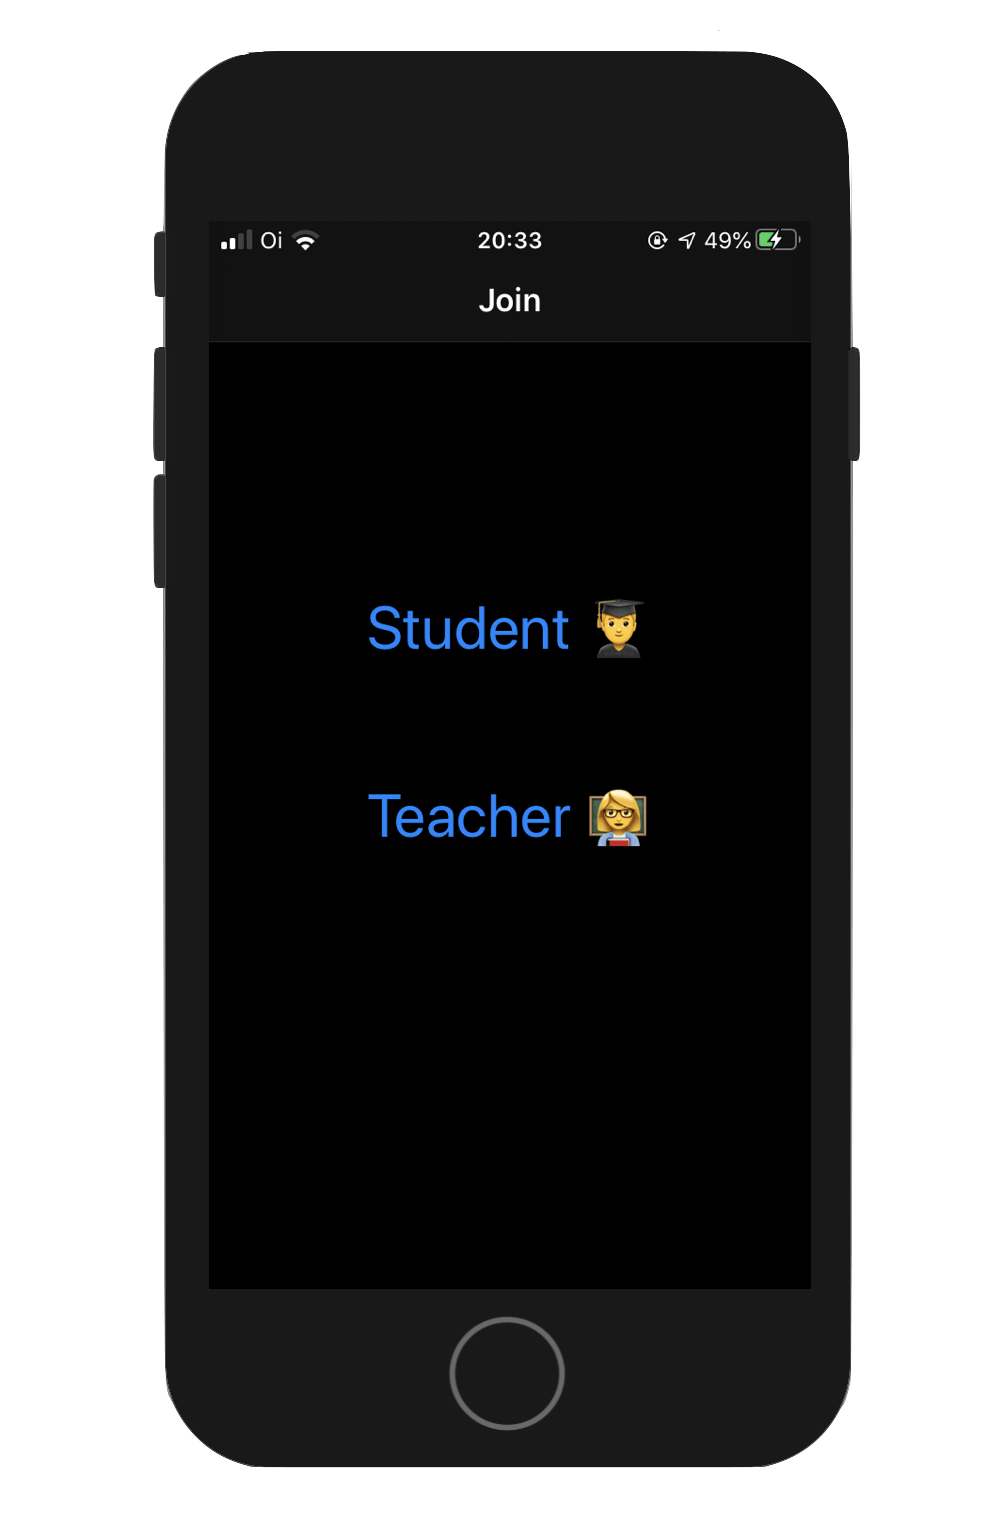 Screenshot shows an app with two buttons, one to join as a student, and the other to participate as the teacher